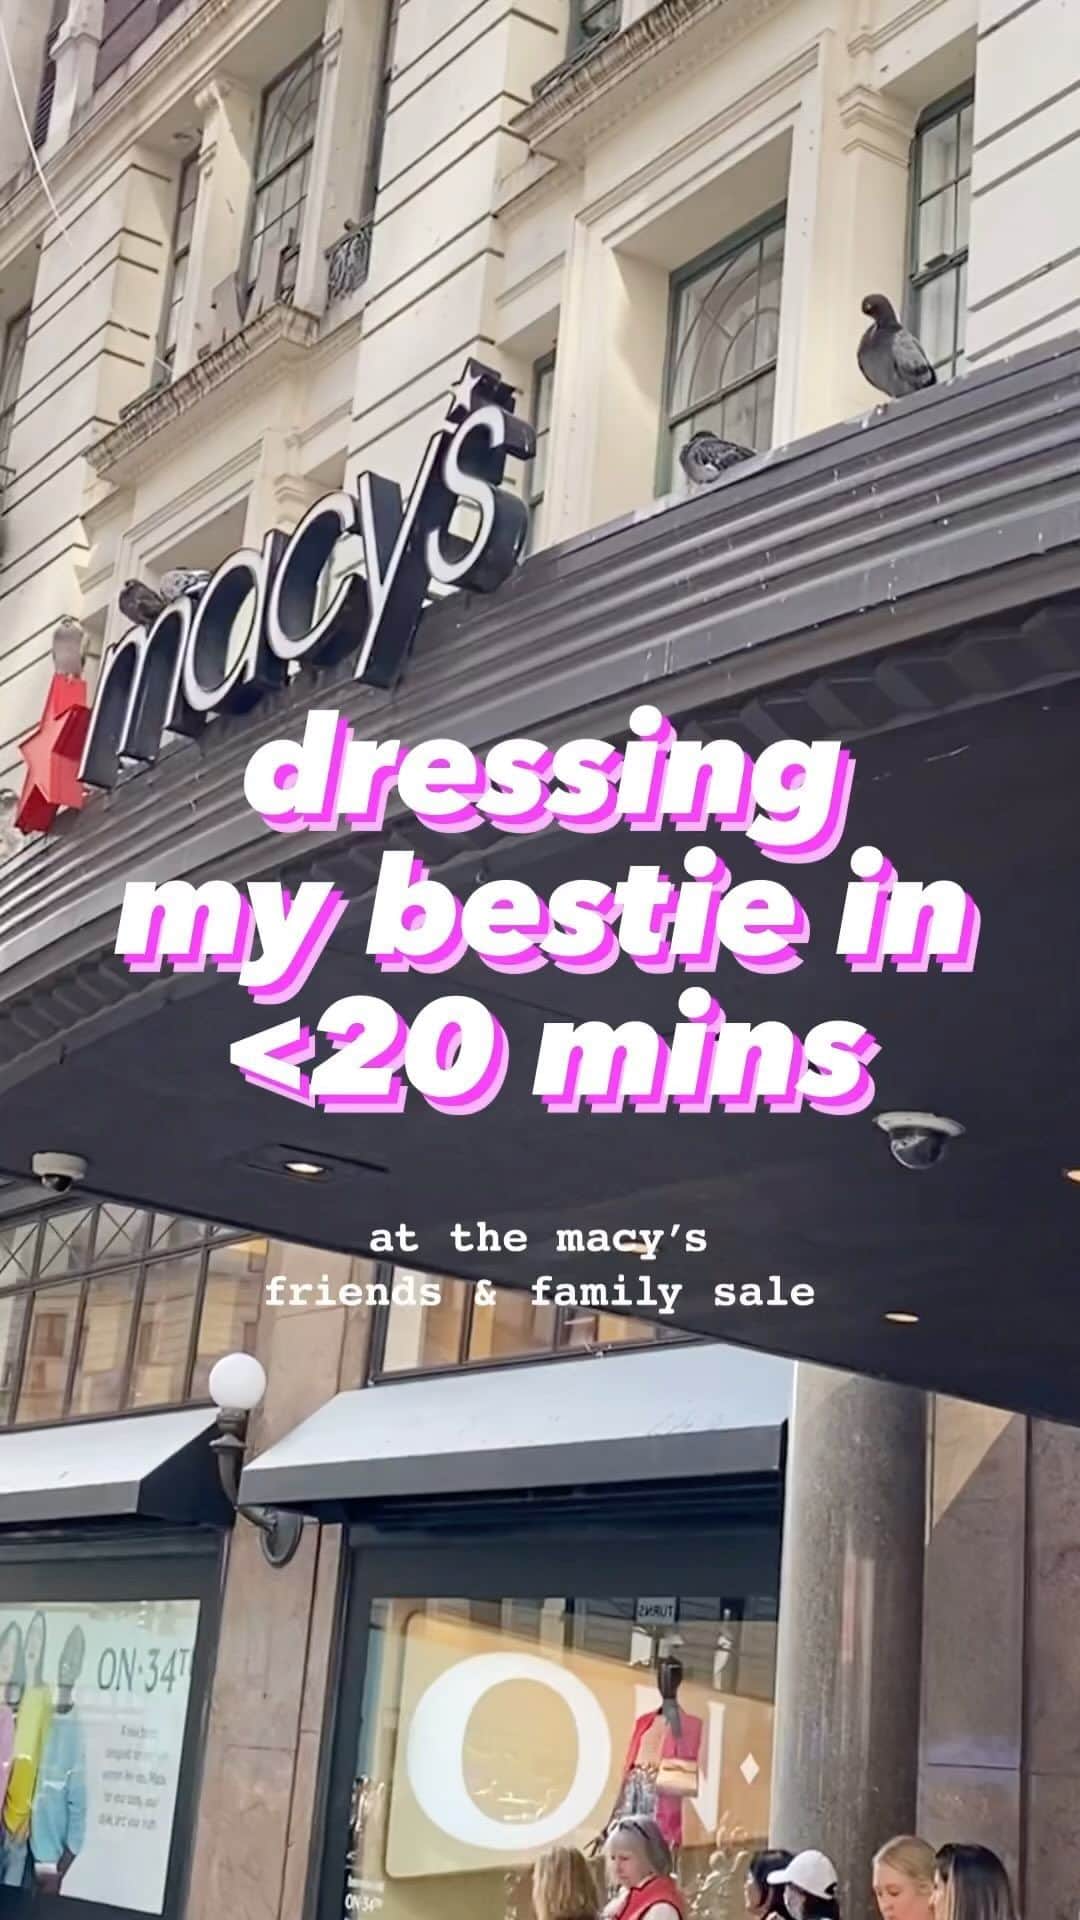 Macy'sのインスタグラム：「Putting together an outfit in less than 20 minutes? Challenge accepted.   Use code: FRIEND to save an extra 30% the latest trends and 15% off beauty during our Friends & Family Sale. Share your tips for getting ready in a hurry below! 👇  Exclusions apply, ends 10/30.」